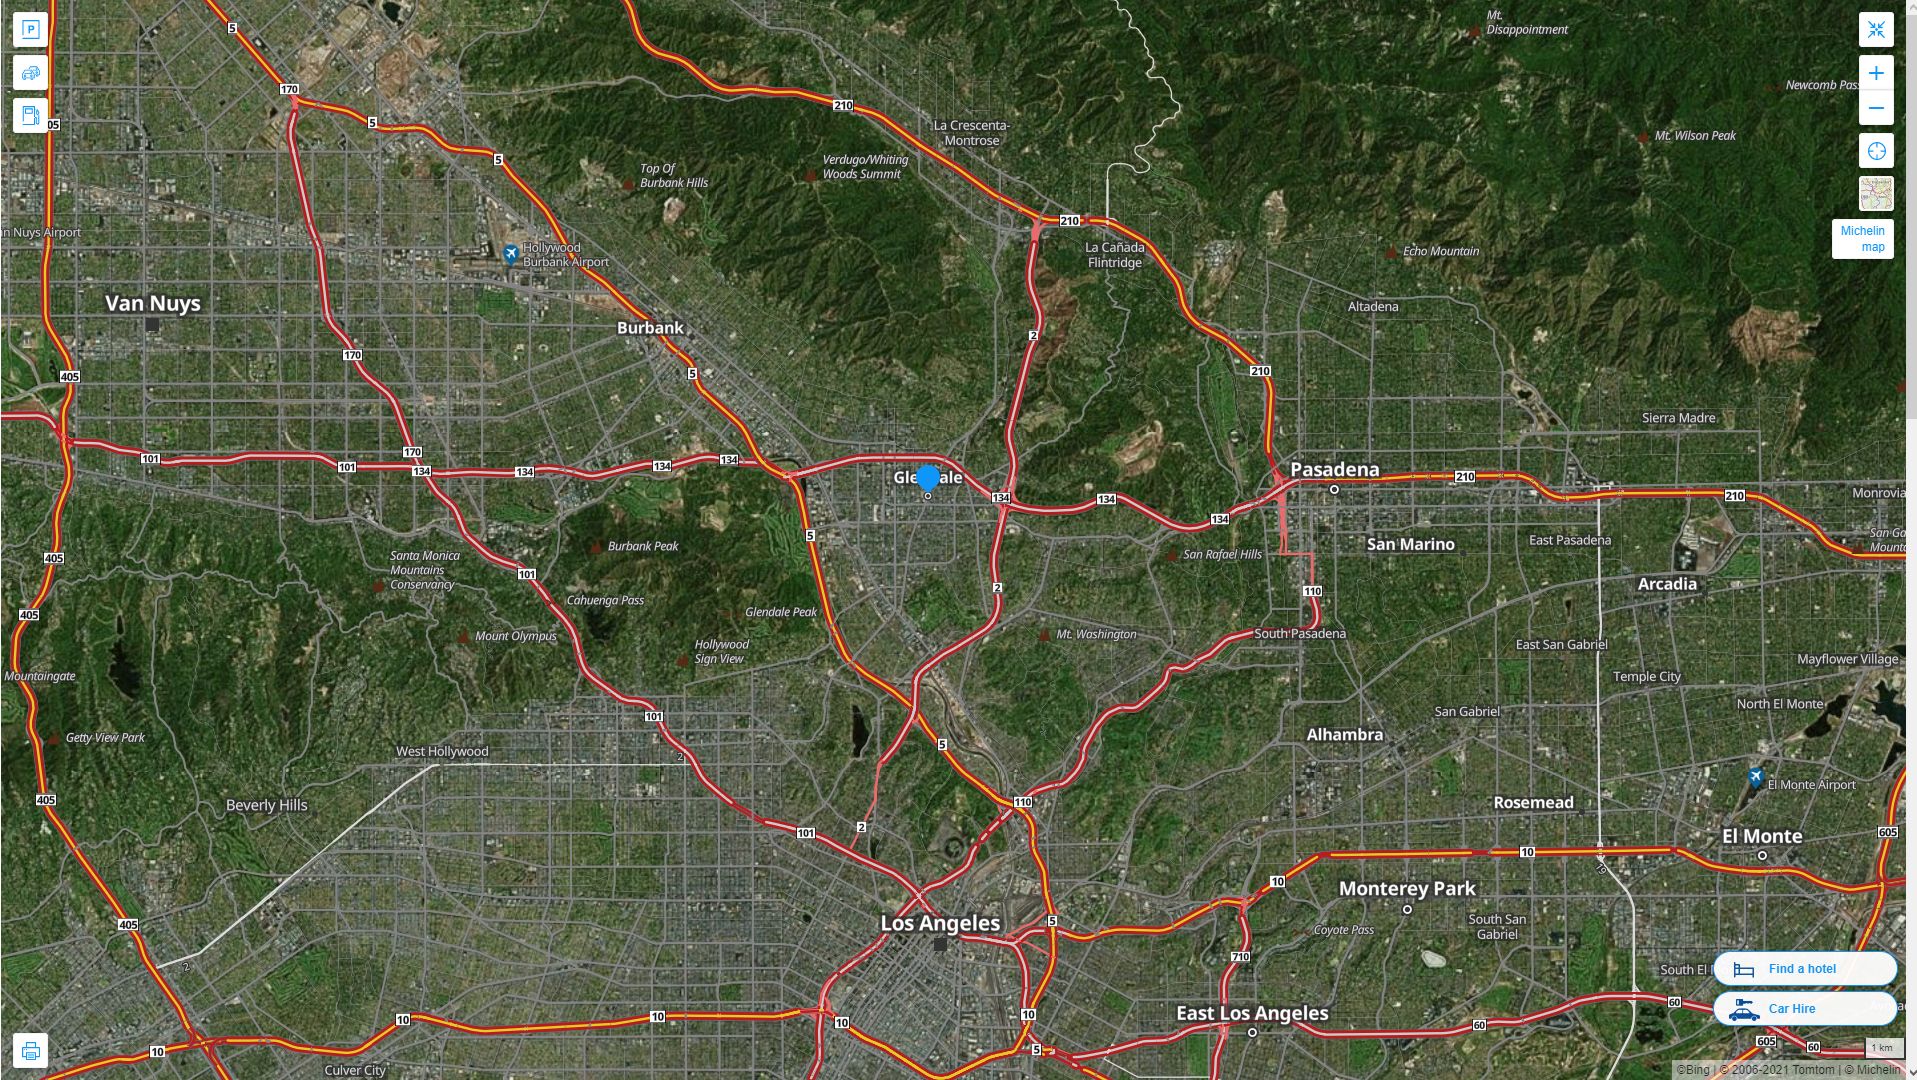 Glendale California Highway and Road Map with Satellite View